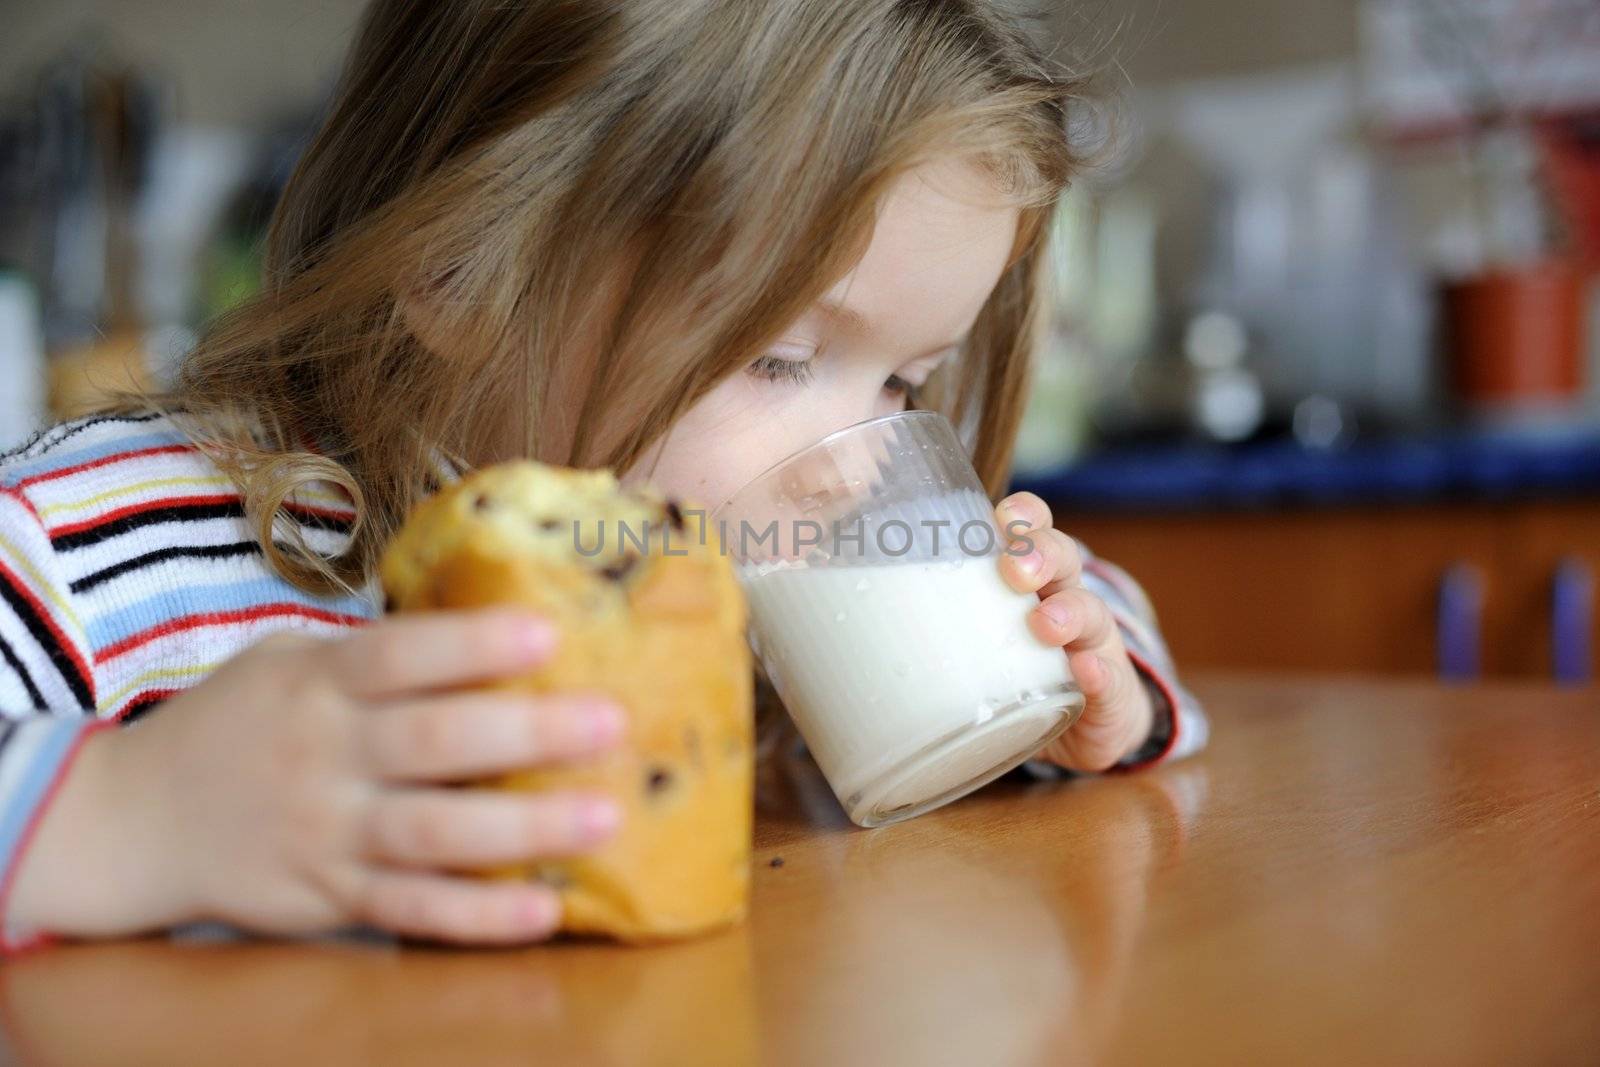 An image of a girl eating sweet cookie with milk